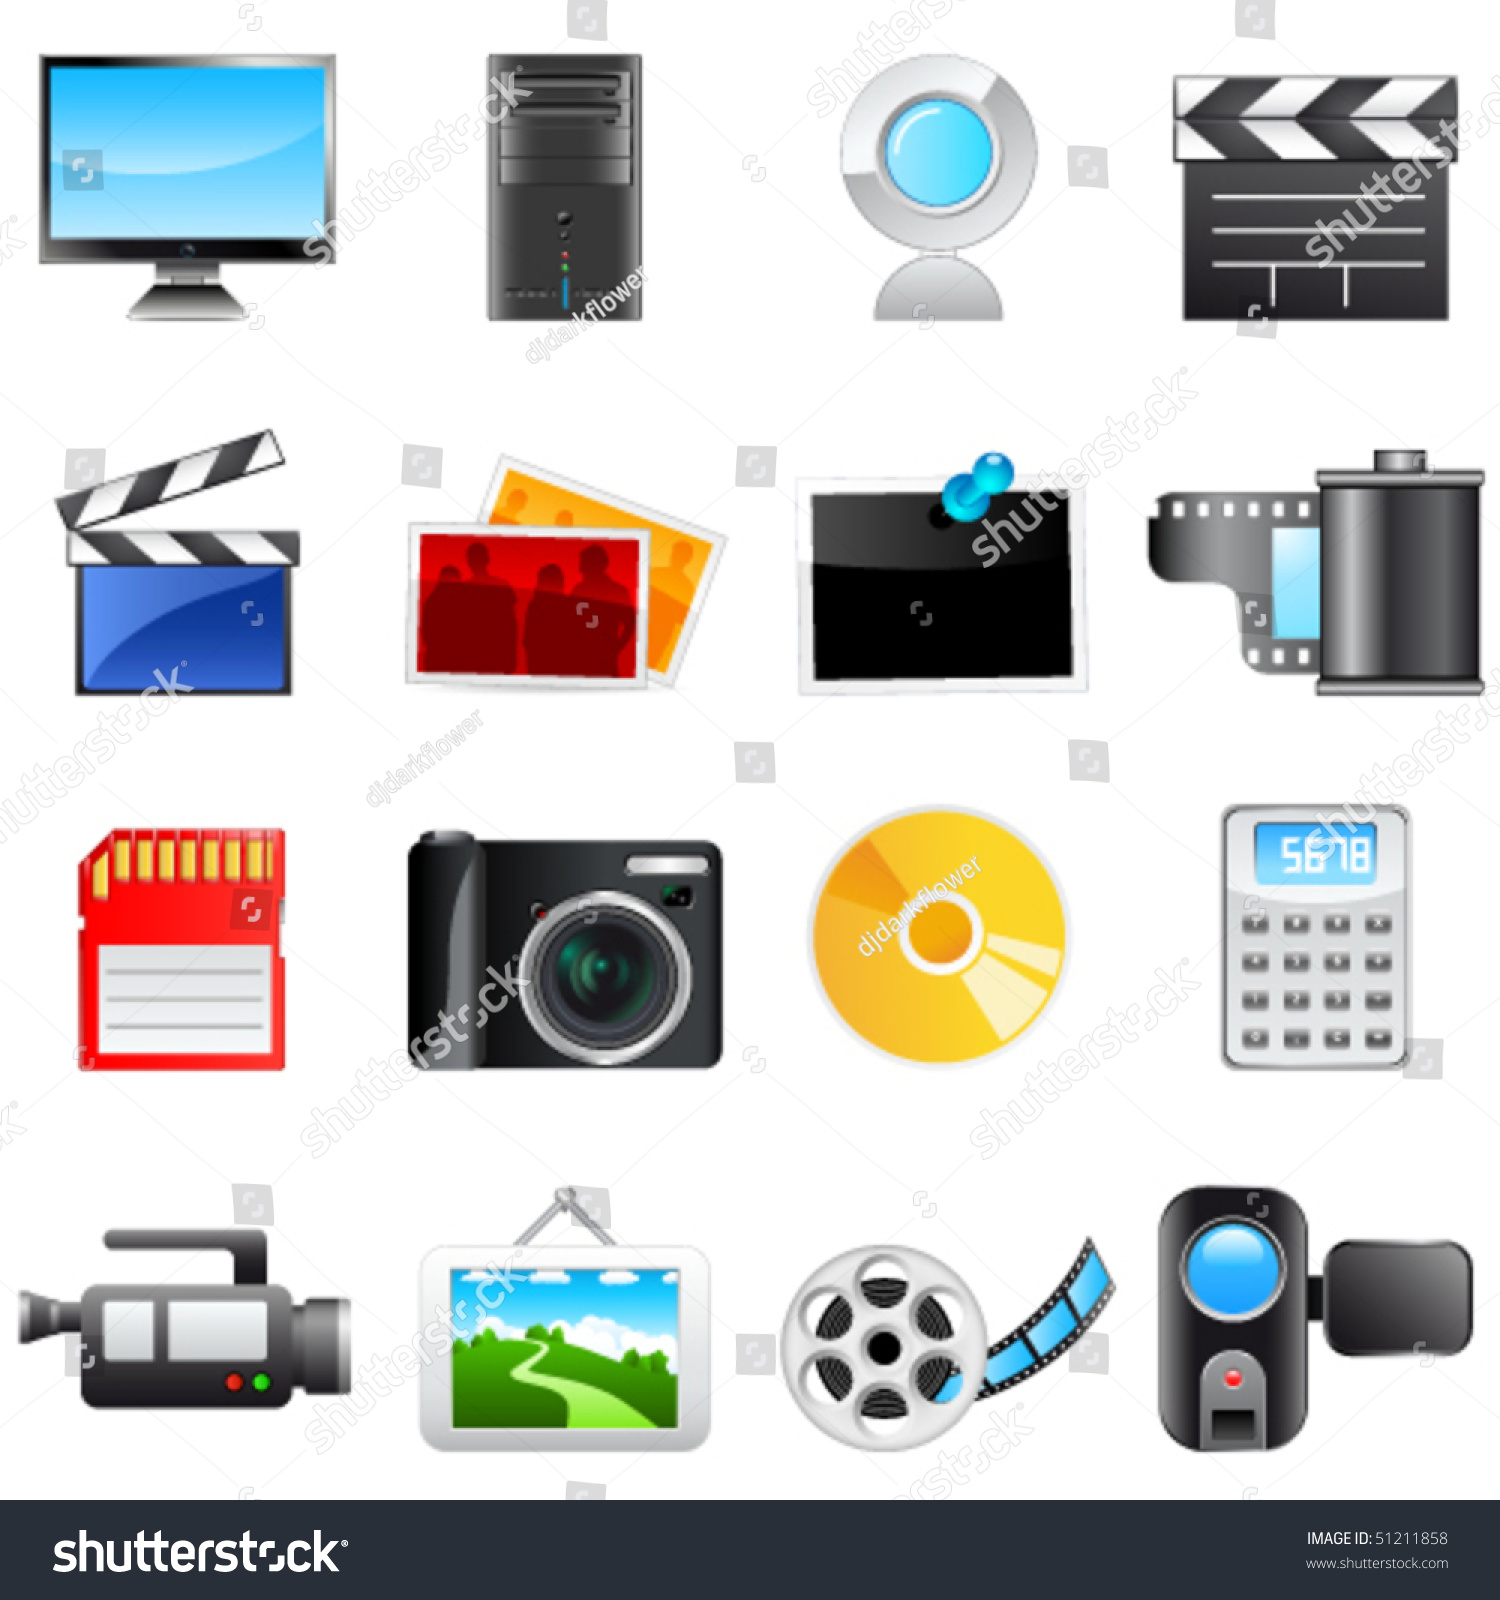 Technology Signs Vector Illustration Stock Vector (Royalty Free ...